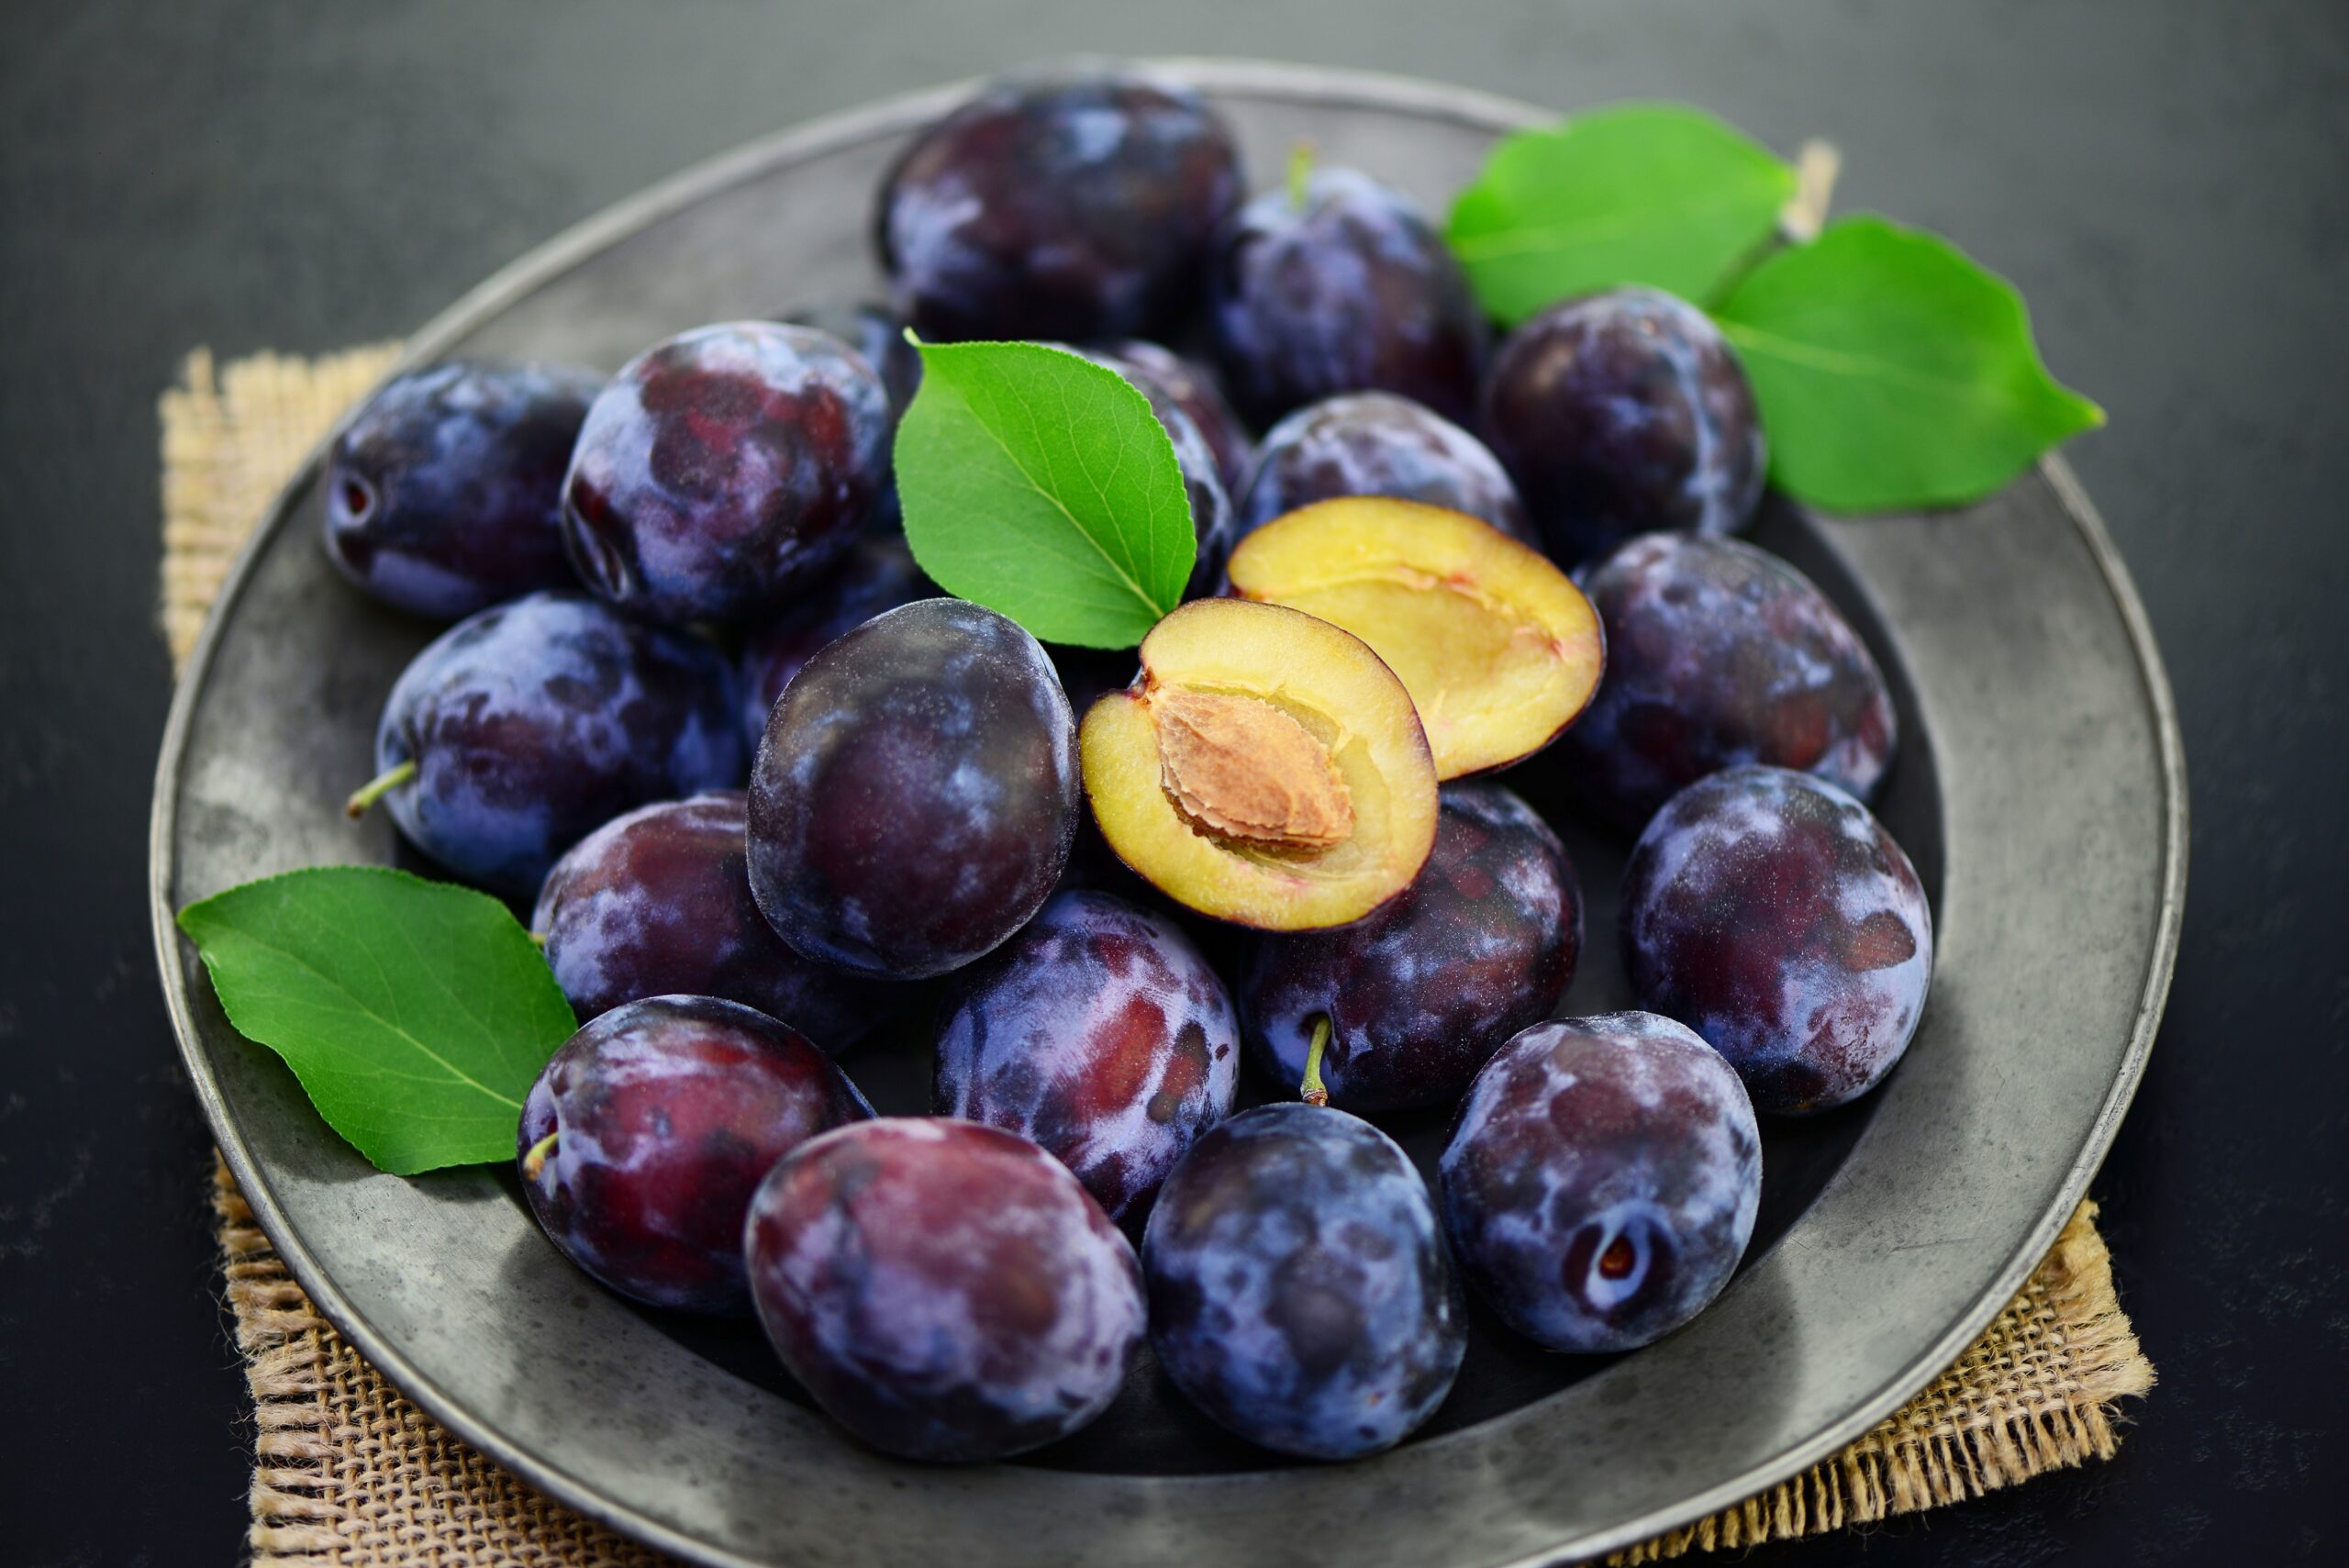 Prunes prevent bone loss and reduce inflammation